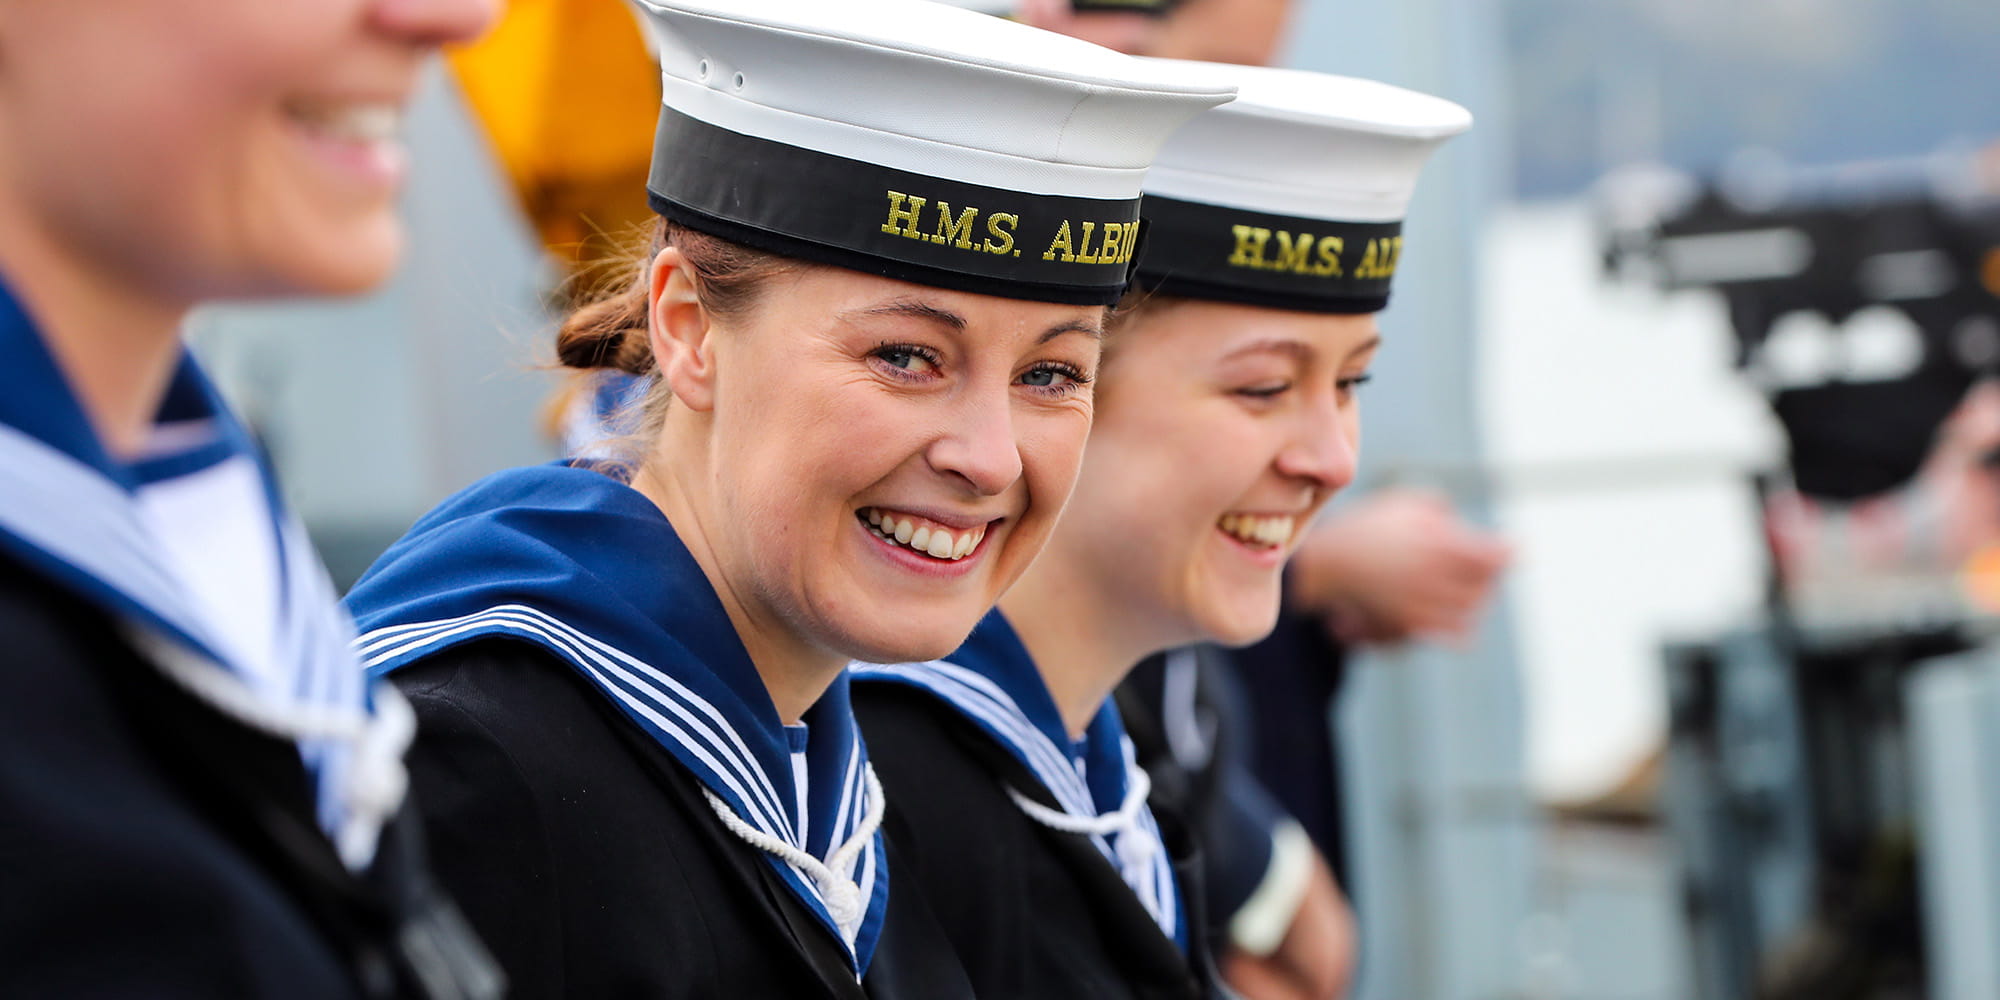 Female service people of HMS Albion smiling at camera